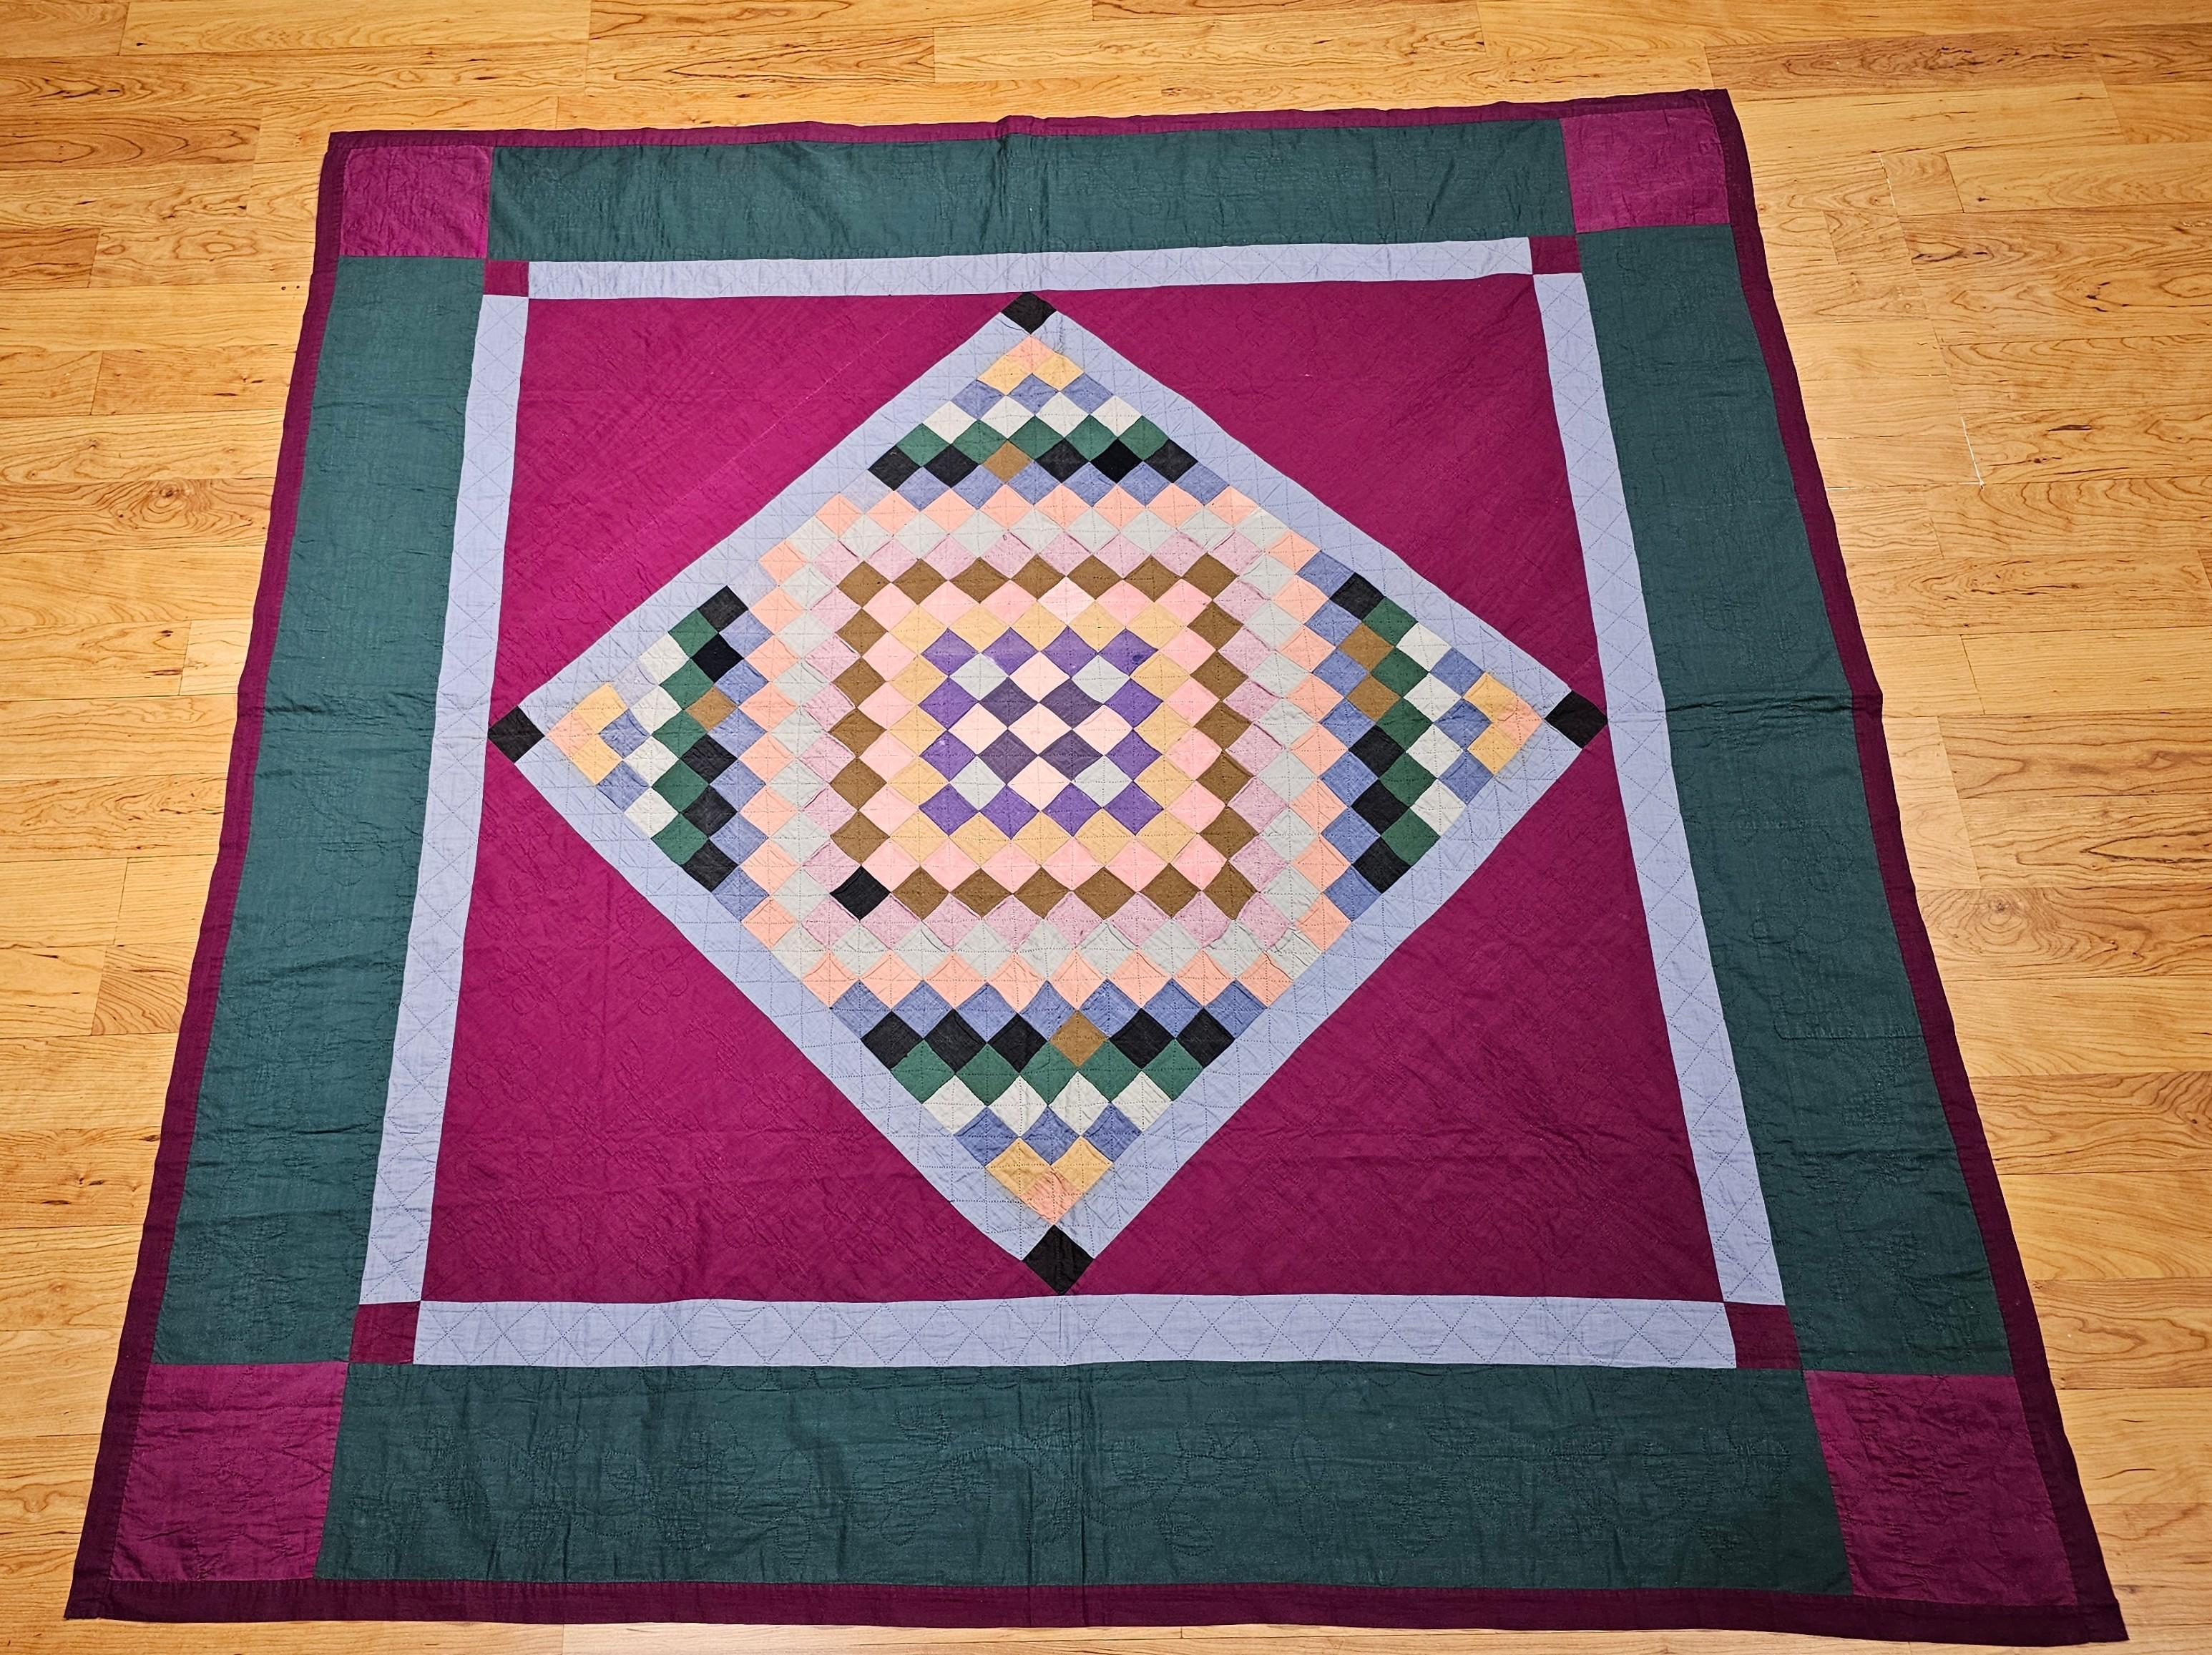 19th century hand-stitched and quilted American Amish Quilt in a” Diamond in a Square Trip Around the World” pattern from Lancaster County, Pennsylvania.   The quilt has a very fine hand stitching  The Amish community in Pennsylvania hand craft the